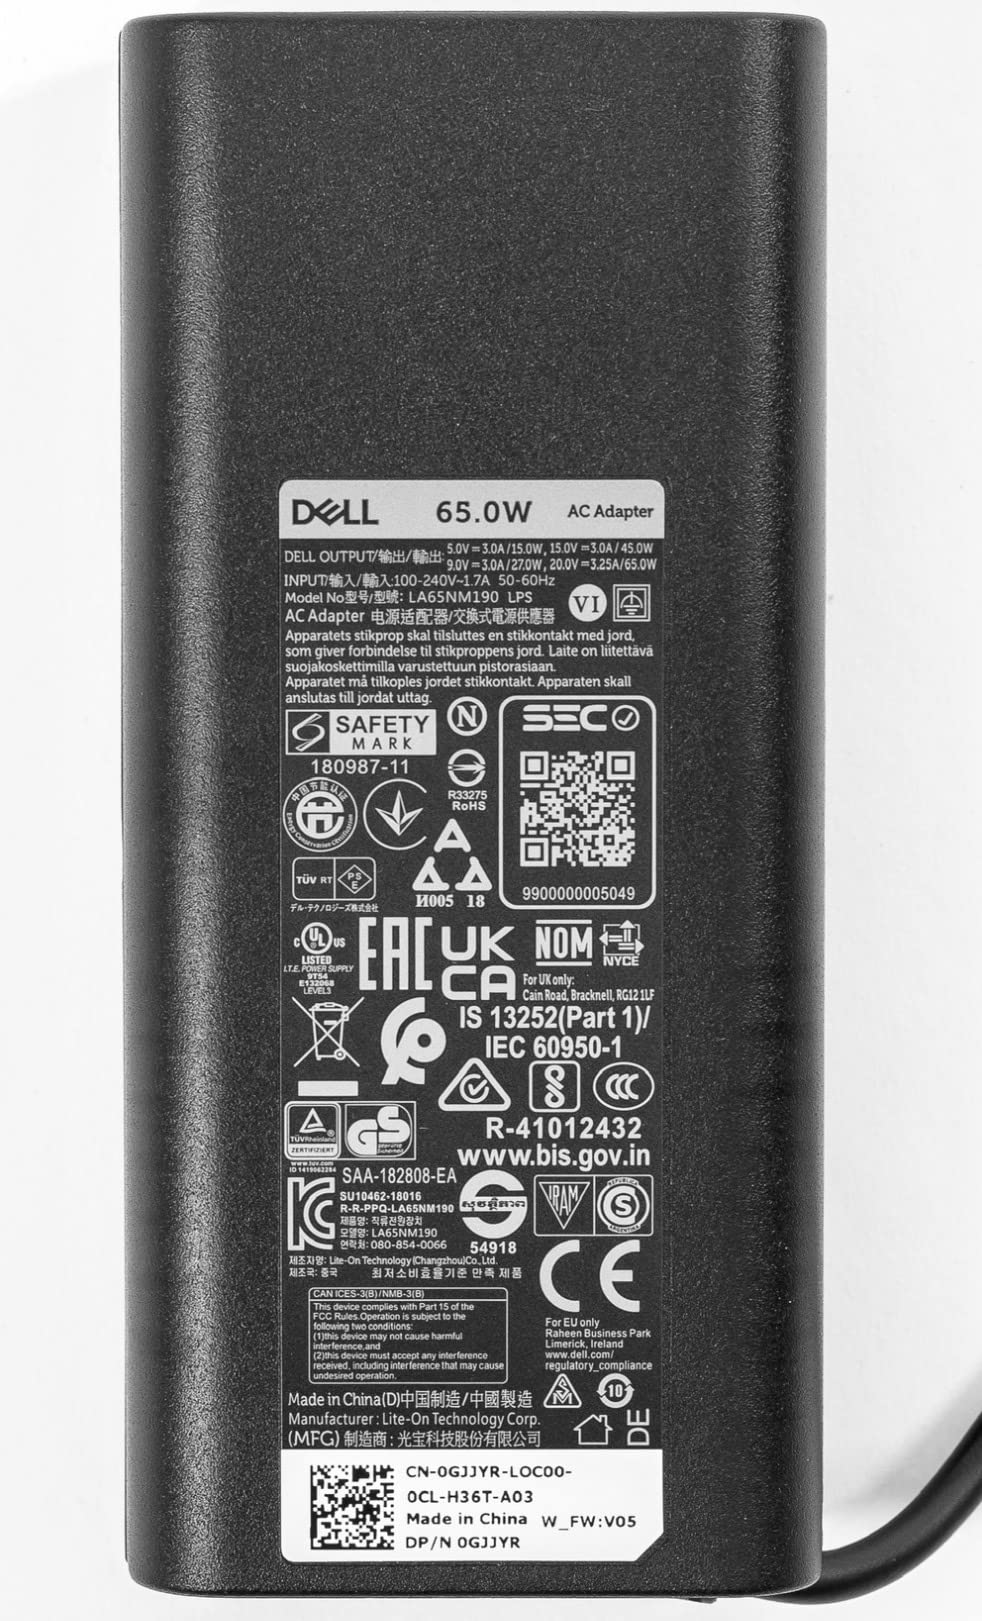 Dell Laptop Charger 65W Watt USB Type C AC Power Adapter LA65NM190/HA65NM190/DA65NM190 Include Power Cord for Dell XPS 12 9250, XPS 13 9350 Compatible with XPS Series and Latitude 5000 Series